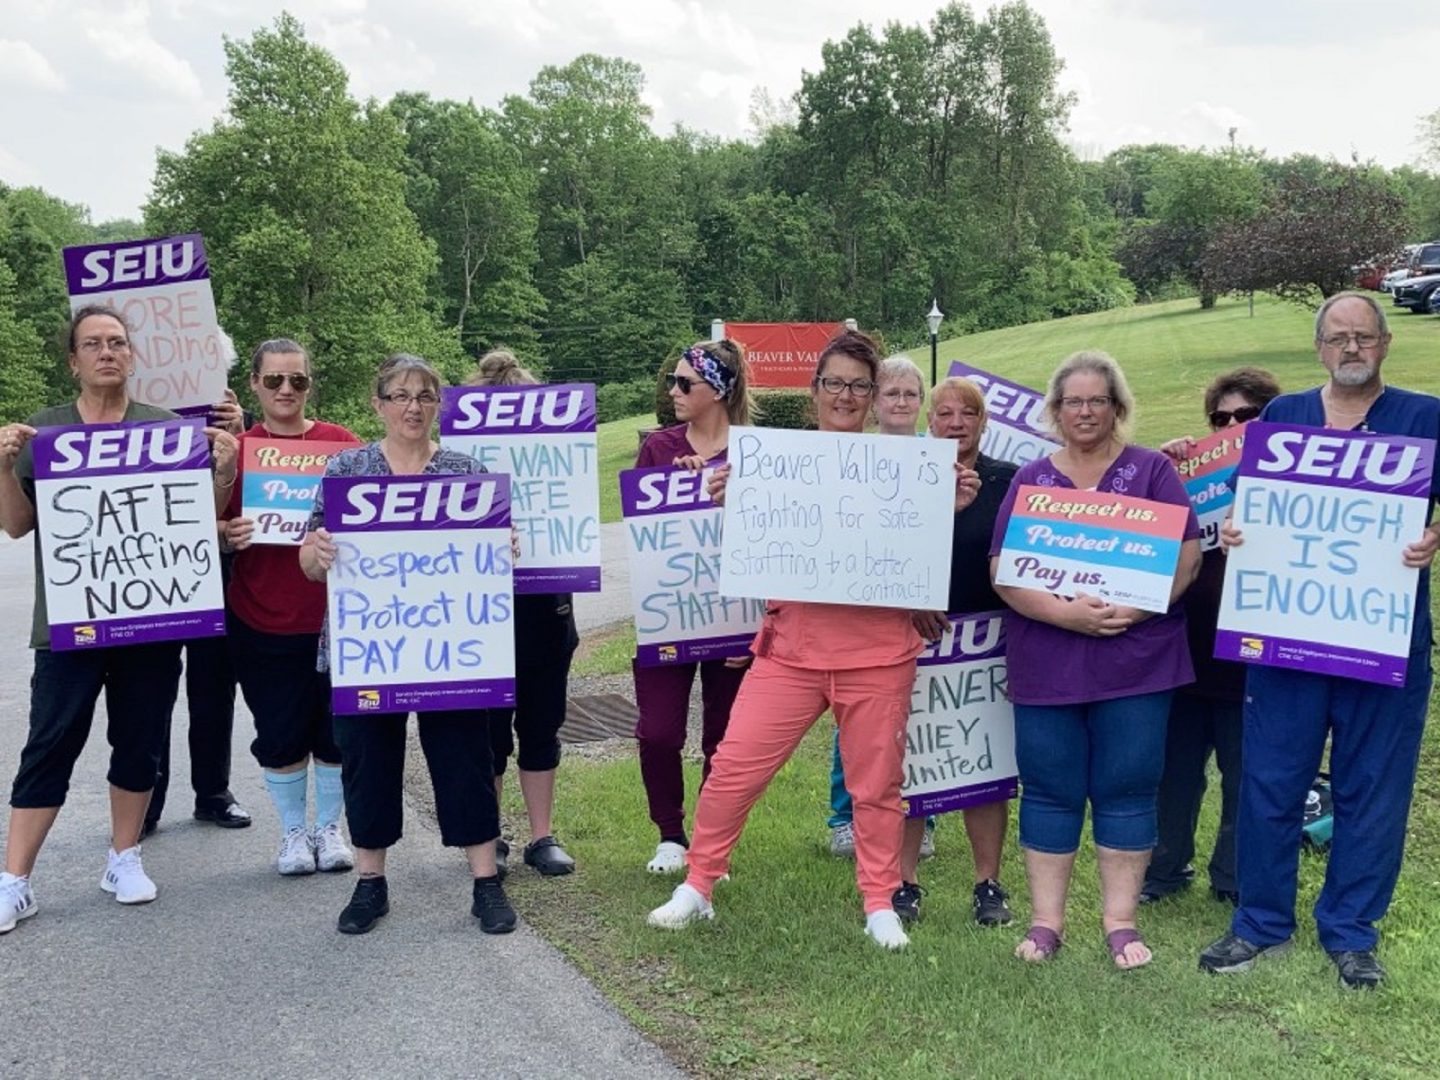 Nursing home workers rally for better working conditions near the Beaver Valley Heathcare and Rehabilitation Center on Tuesday, May 25, 2021.
